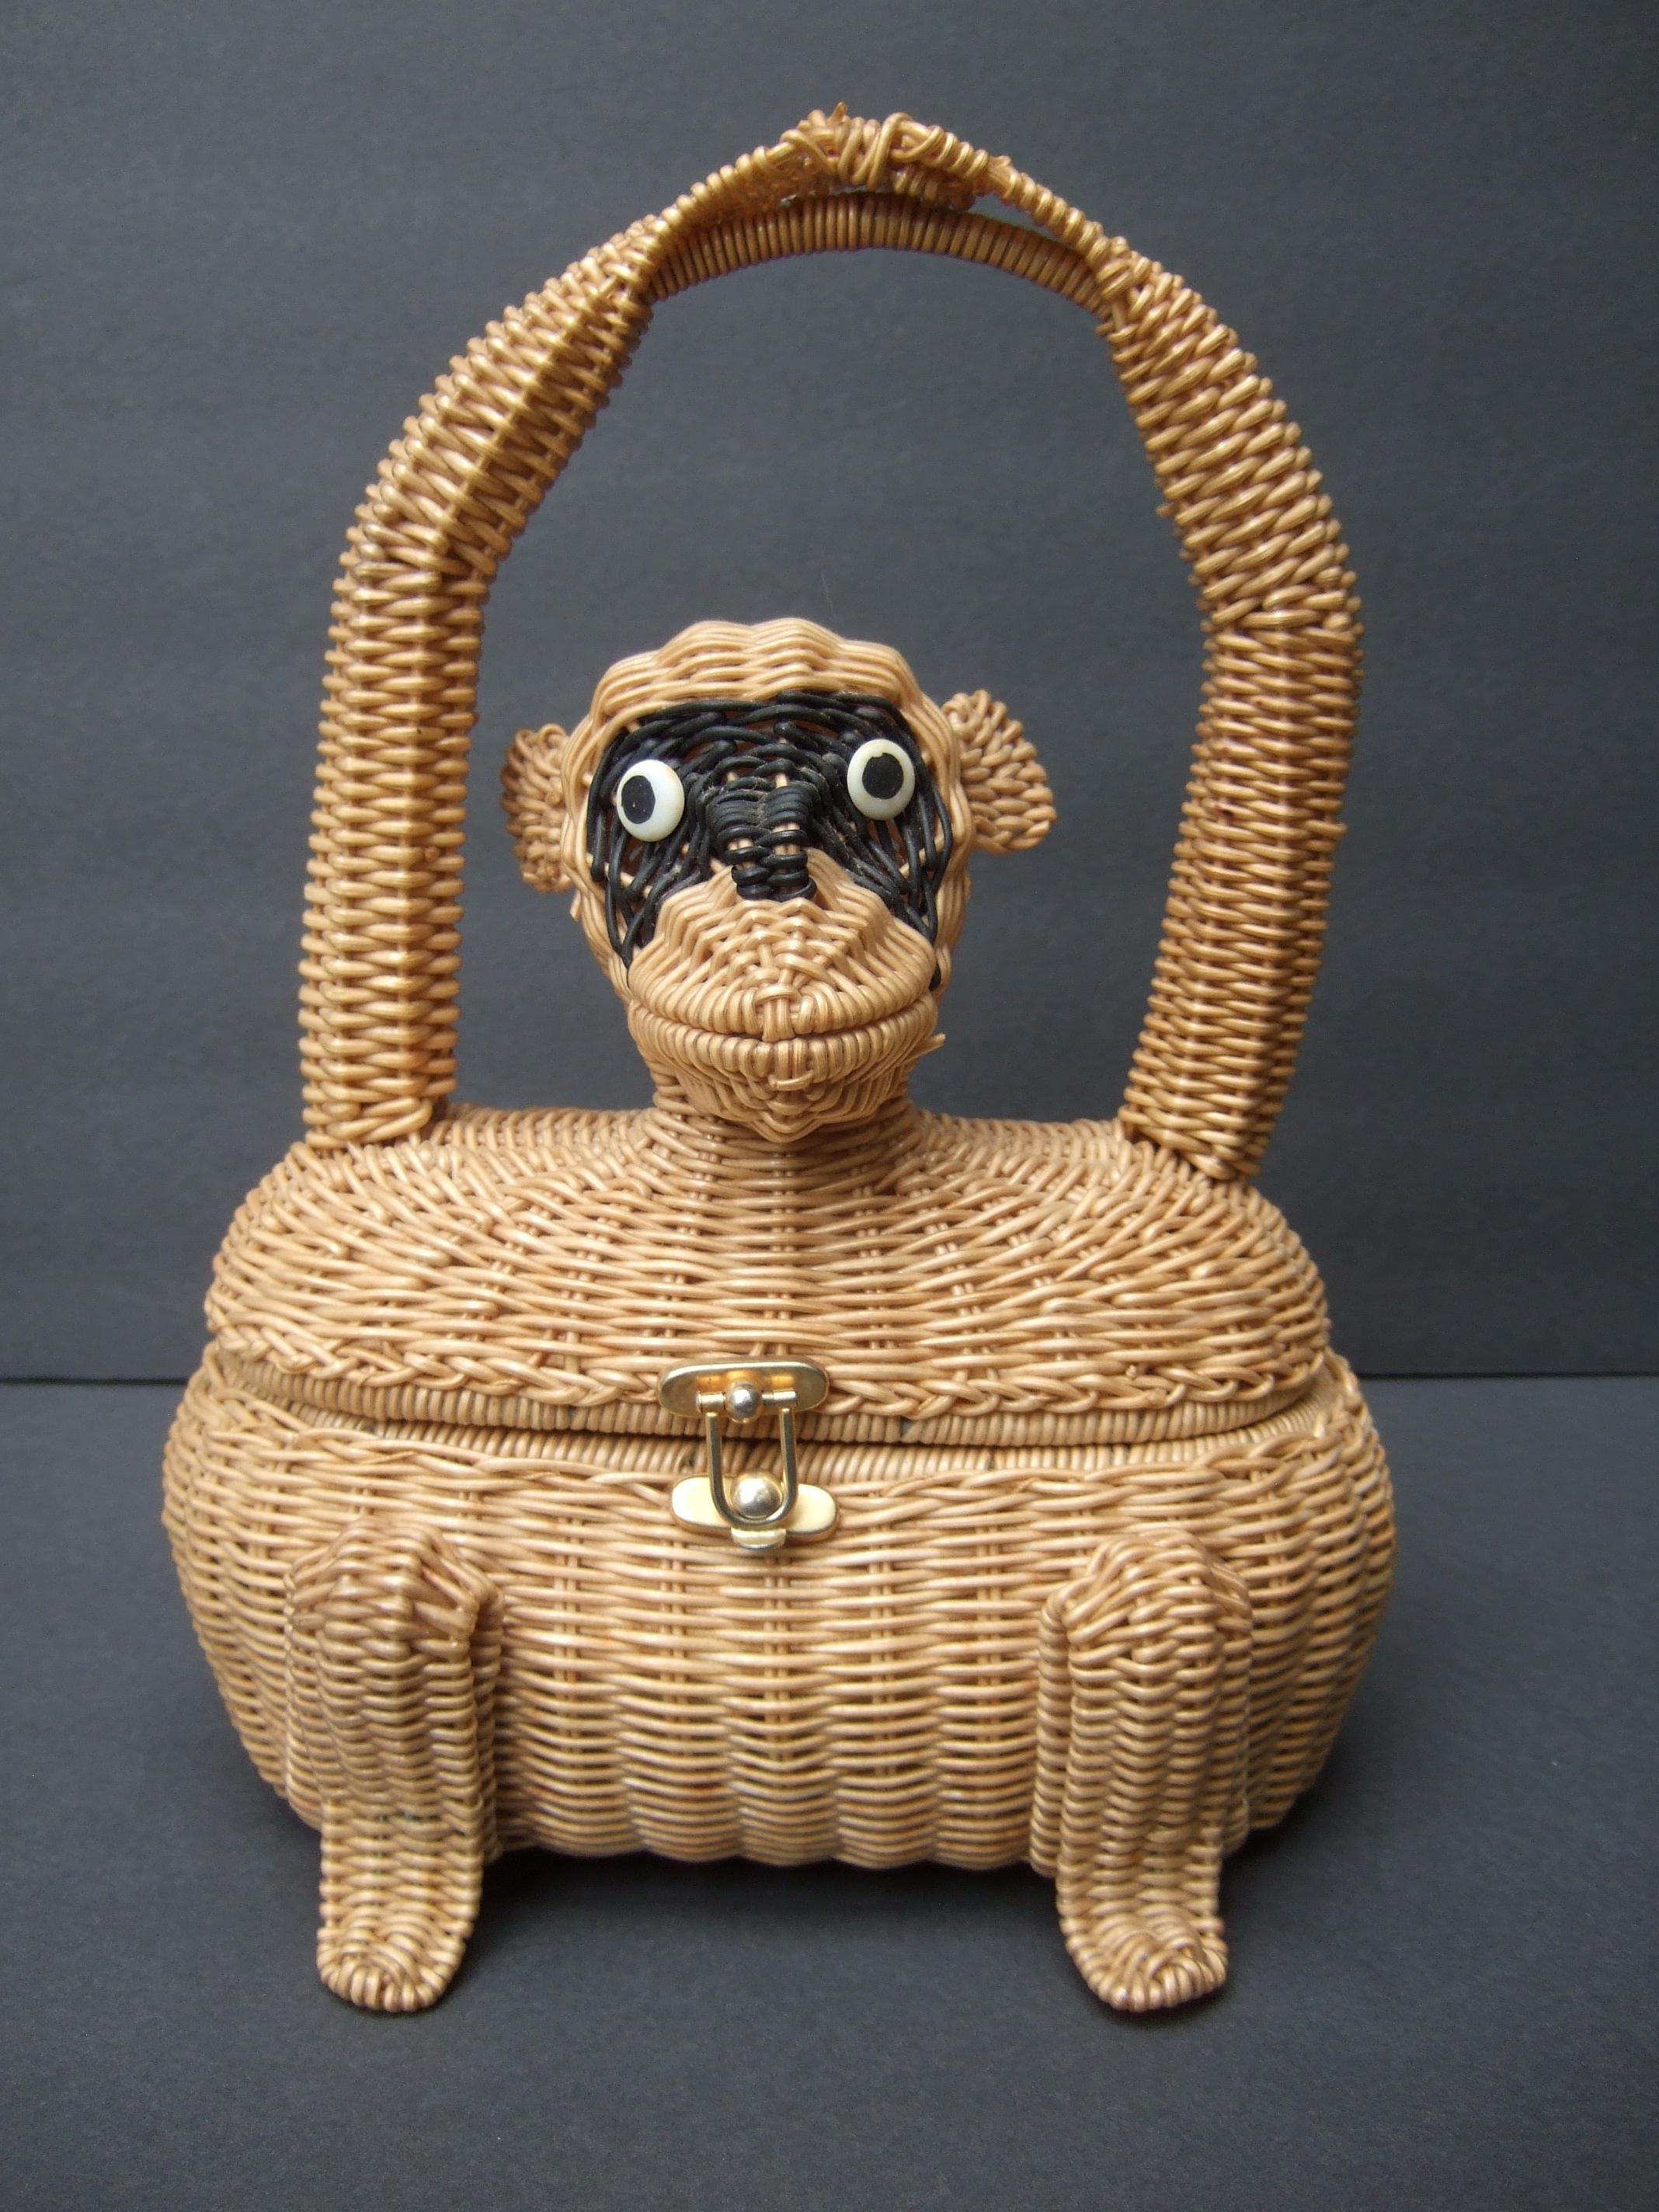 Extremely rare whimsical wicker three dimensional monkey handbag c 1960
The charming midcentury wicker handbag is designed with an endearing monkey figure
Carried with a matching wicker handle designed with the monkey's cinched arms 

The face is